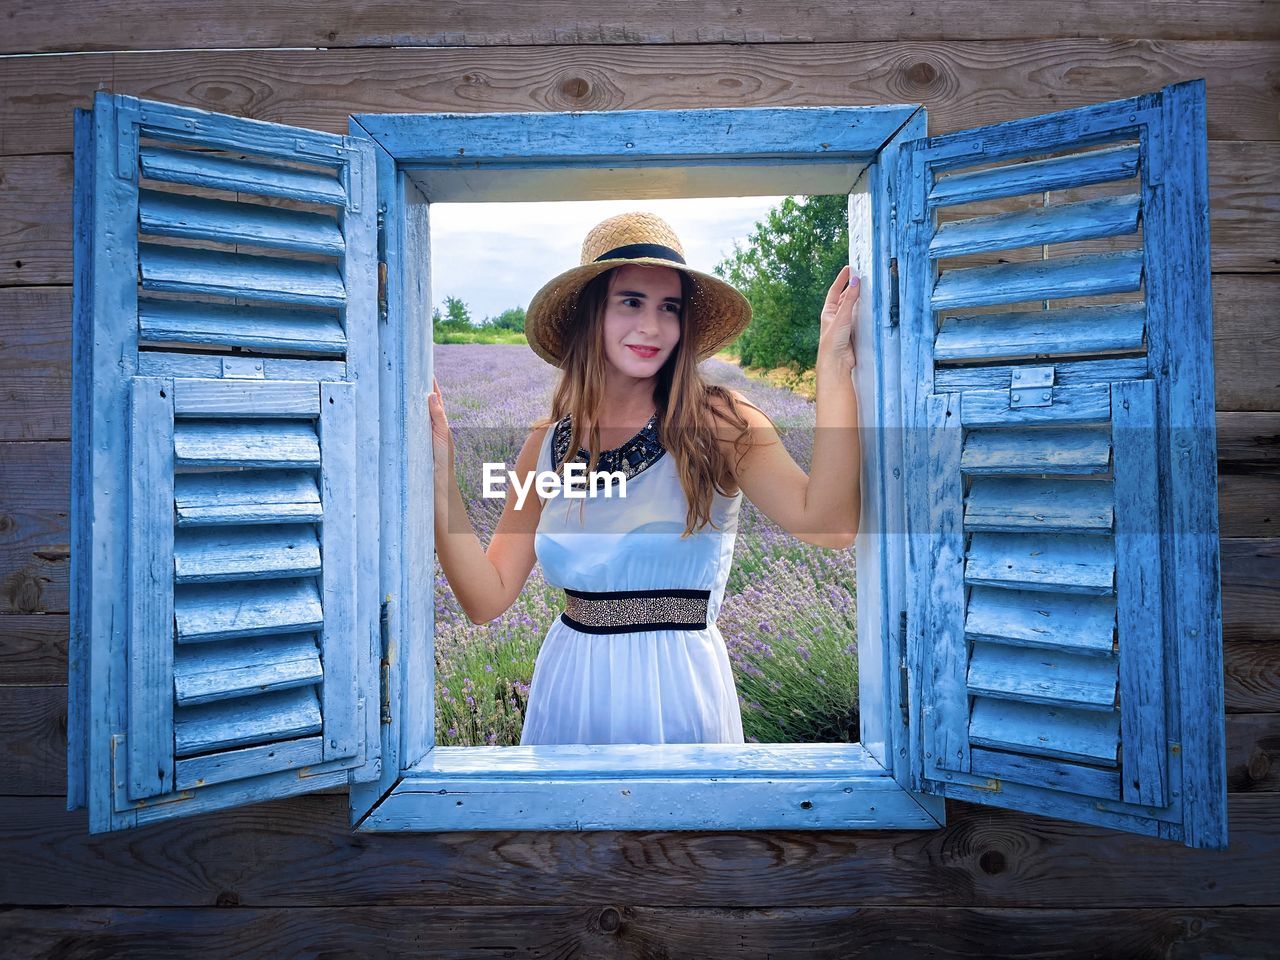 Woman wearing white dress and sun hat looking out through a wooden window